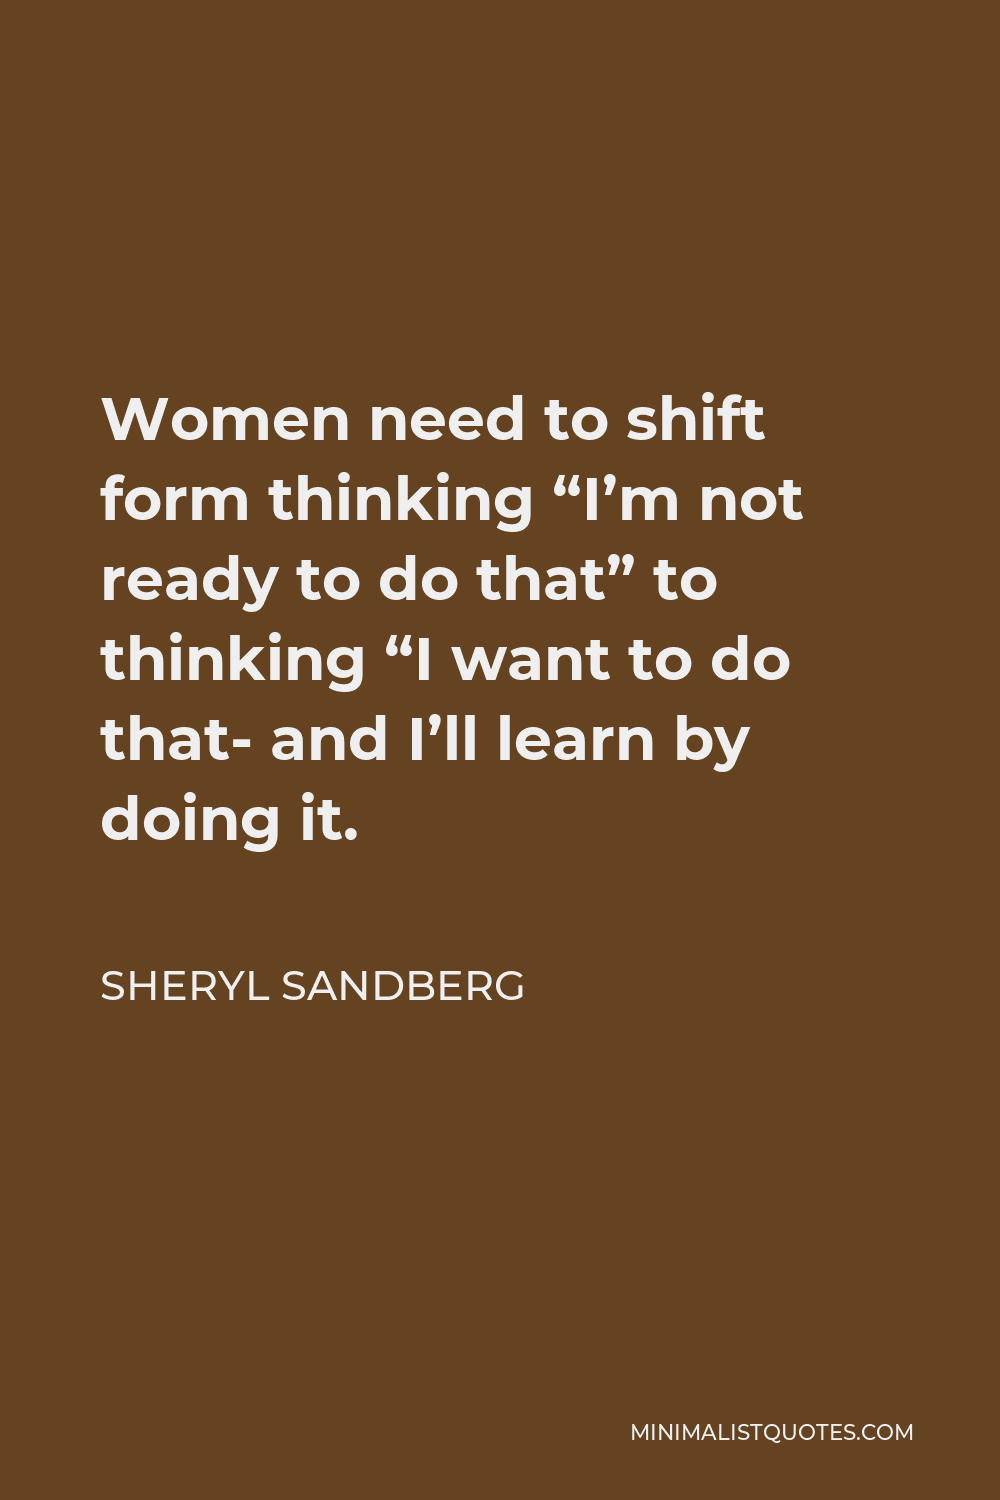 Sheryl Sandberg Quote - Women need to shift form thinking “I’m not ready to do that” to thinking “I want to do that- and I’ll learn by doing it.